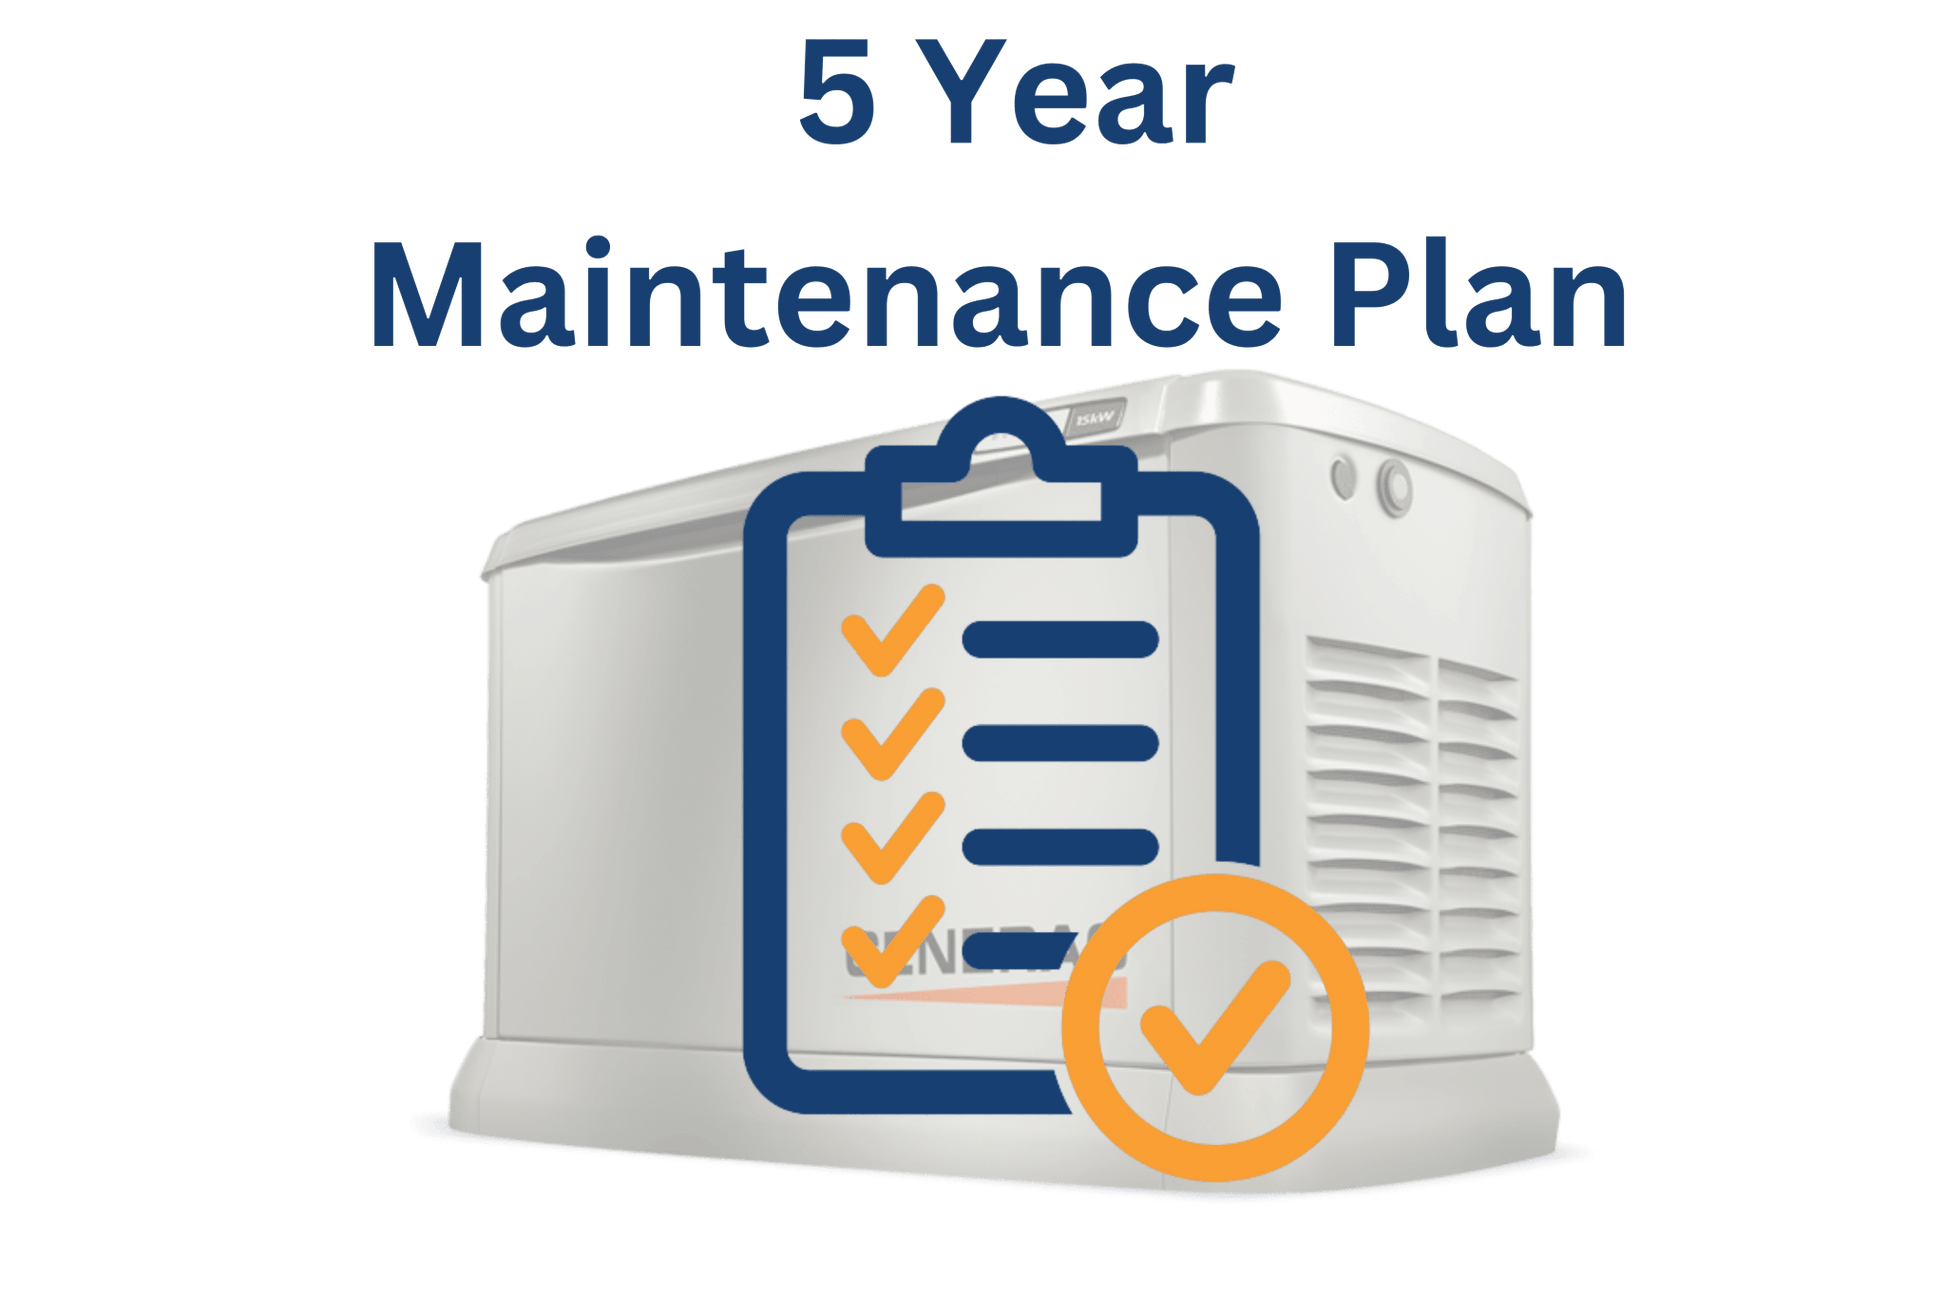 Residential Home Standby Generator - Maintenance Plan - 5 Year - OPE Sheild